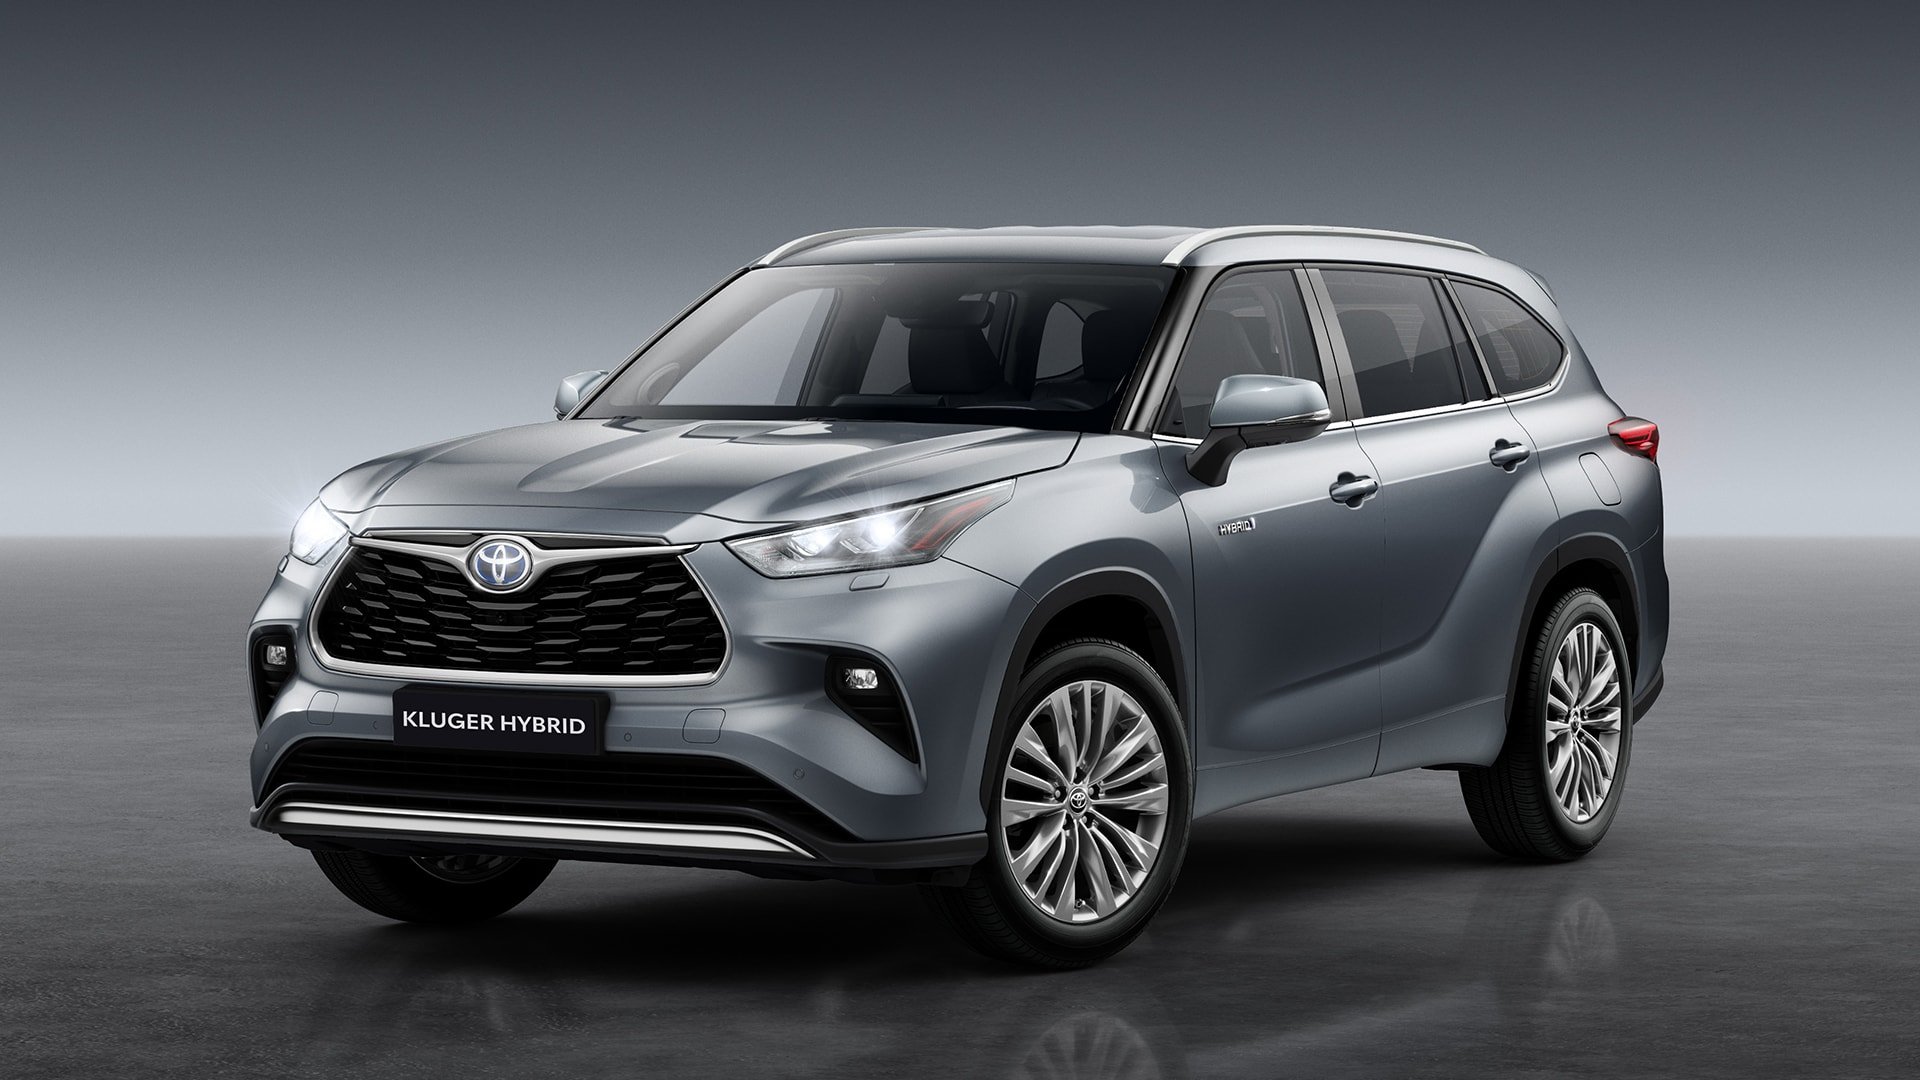 Hybrid Power Features in Next-Generation Toyota Kluger | Latest News